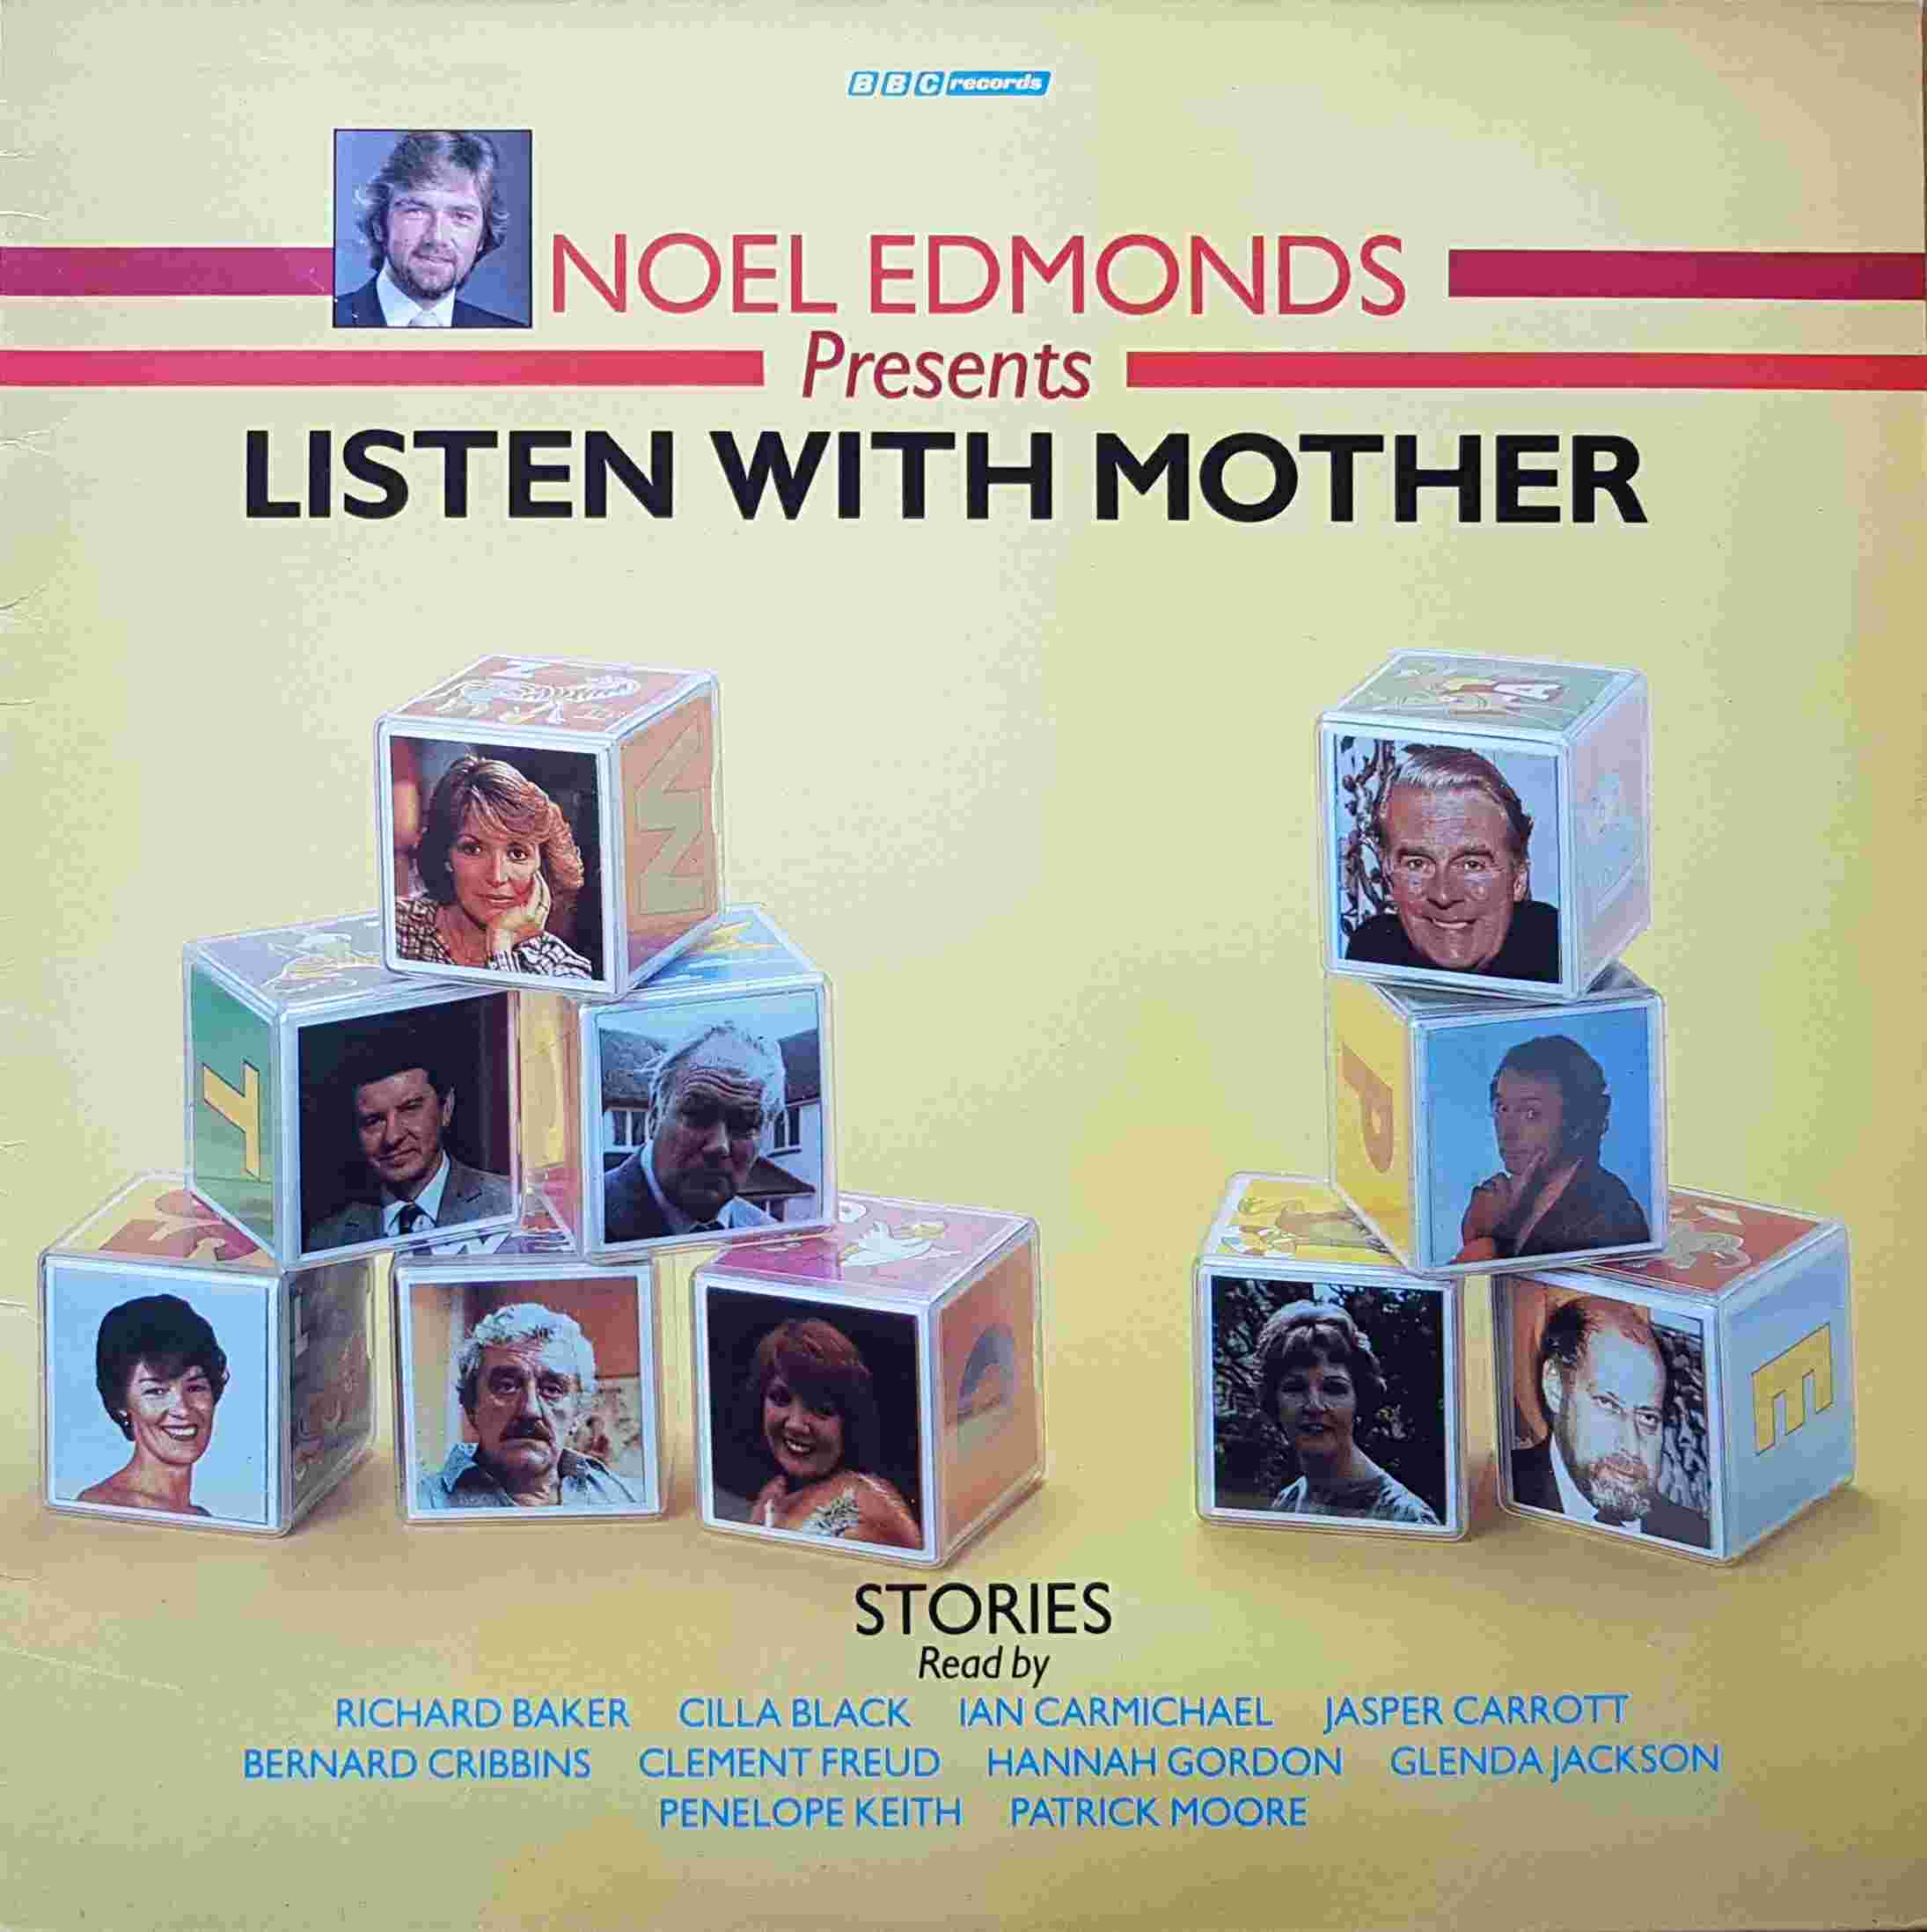 Picture of REC 525 Listen with mother by artist Noel Edmonds from the BBC albums - Records and Tapes library